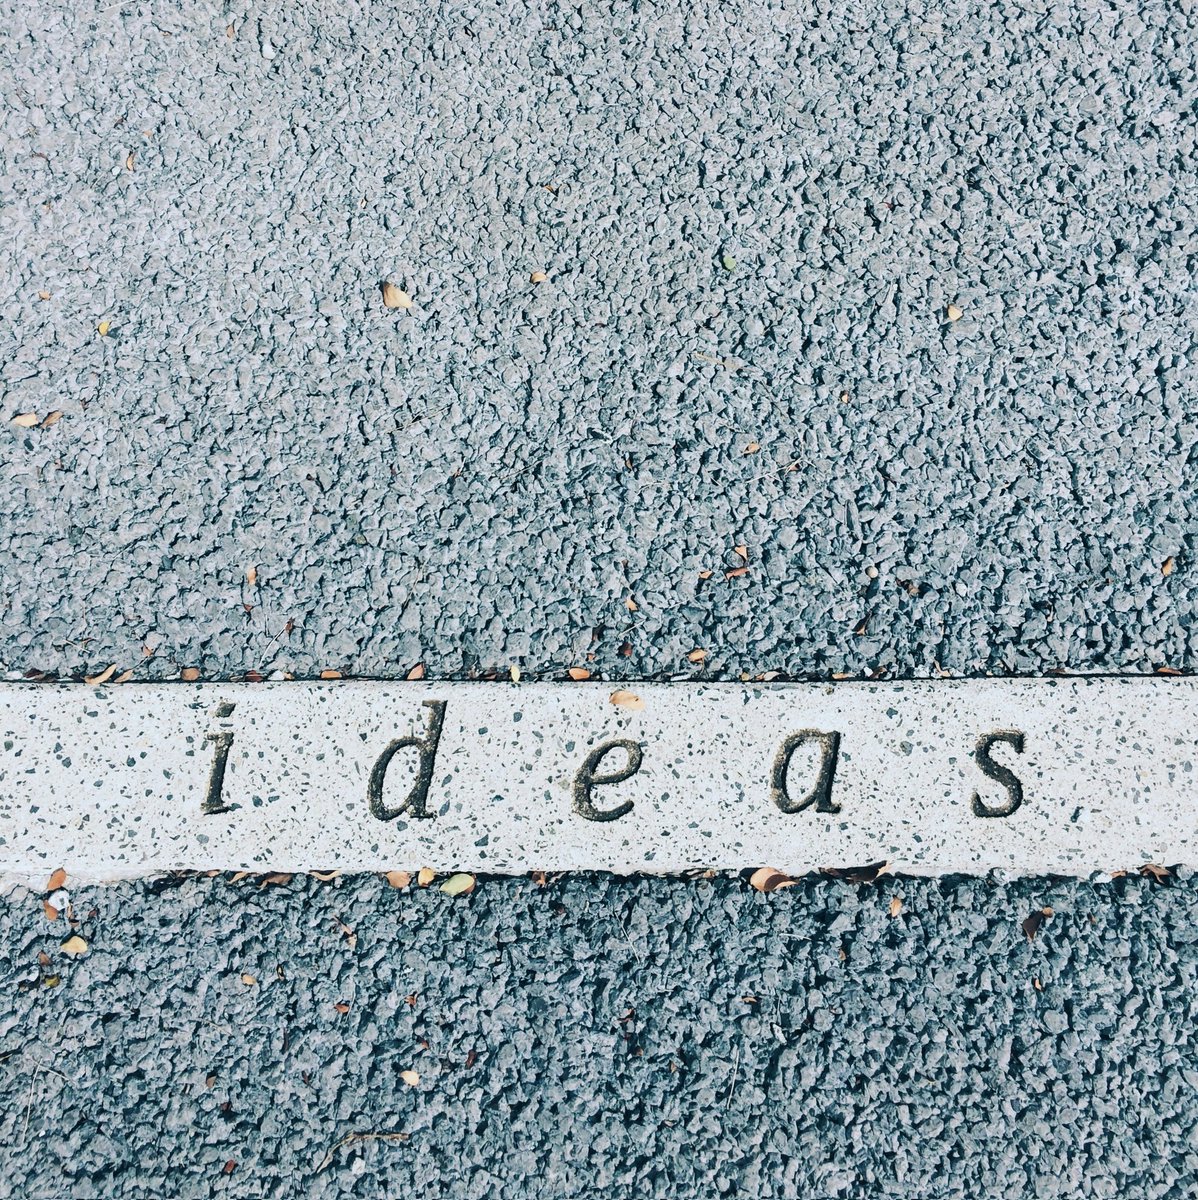 A short post on why ideas and creativity should be embraced over pragmatism and doing things the way they've always been done. linkedin.com/posts/chris-ha…